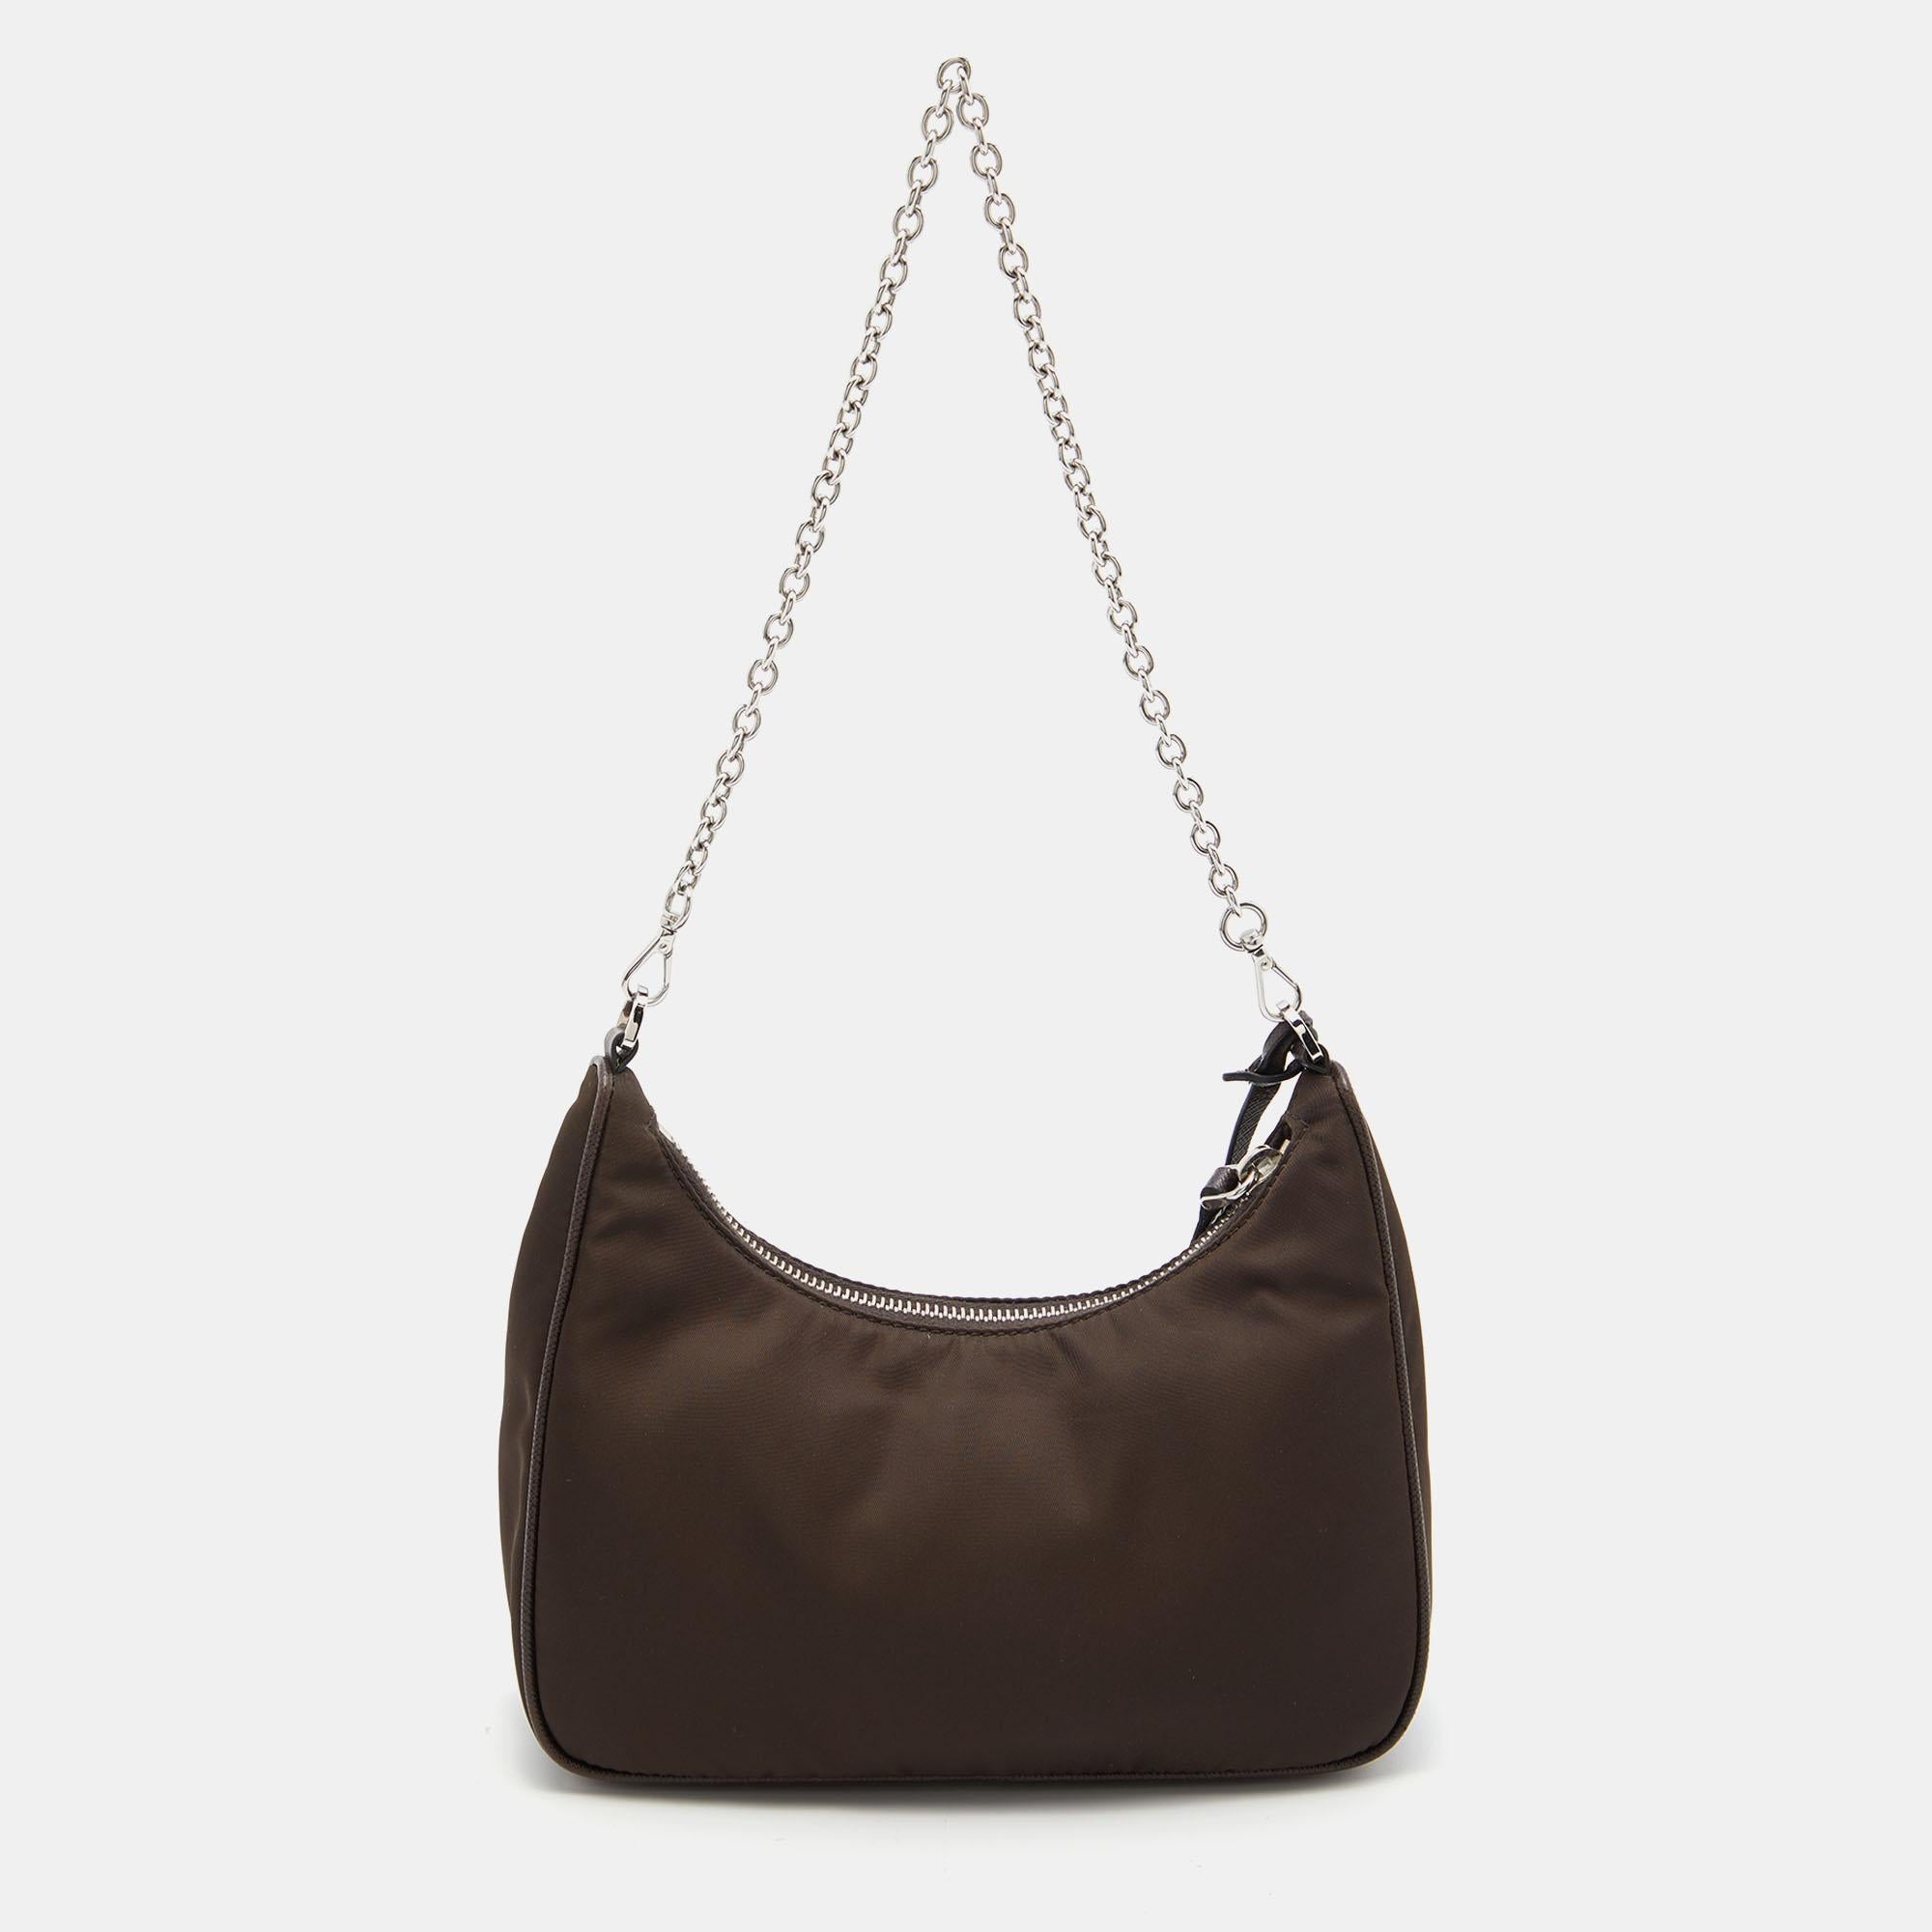 The petite silhouette and classic elements made the Prada Re-Edition 2005 bag an instant hit among fashionistas. Inspired by the classic mini hobo bag, this creation comes made from fine materials and features a shoulder strap.

Includes: Detachable